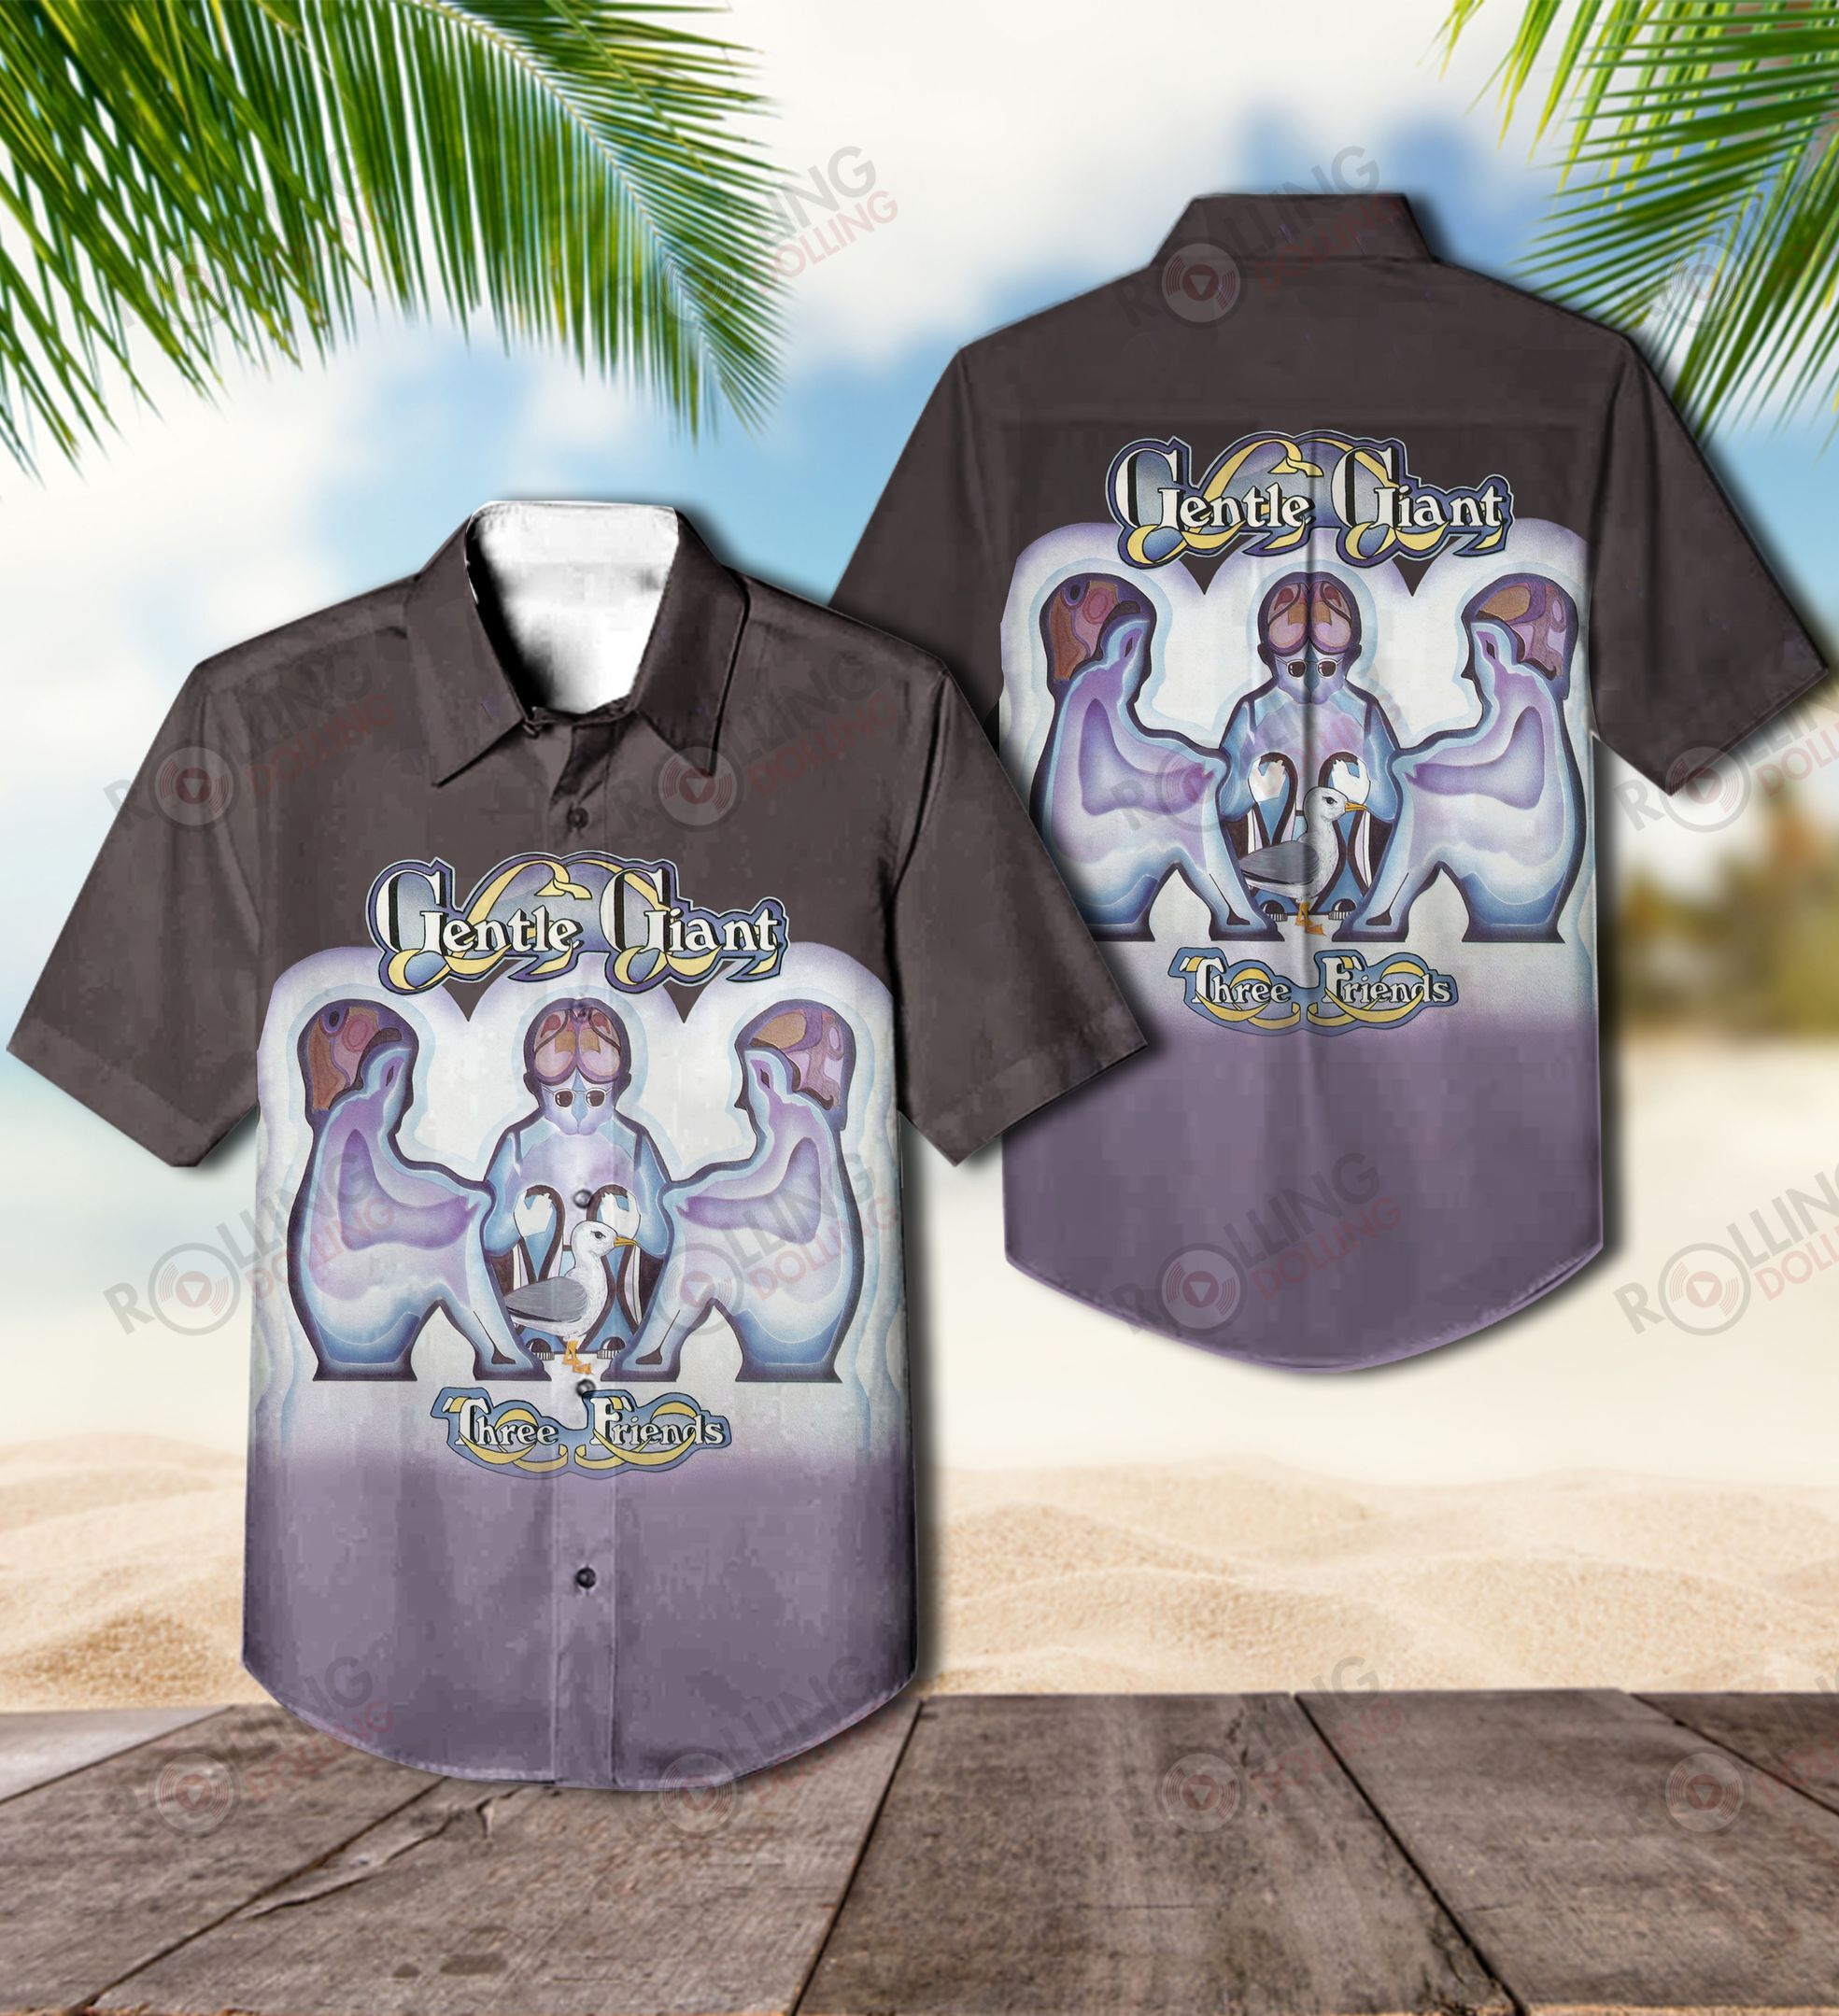 For summer, consider wearing This Amazing Hawaiian Shirt shirt in our store 73